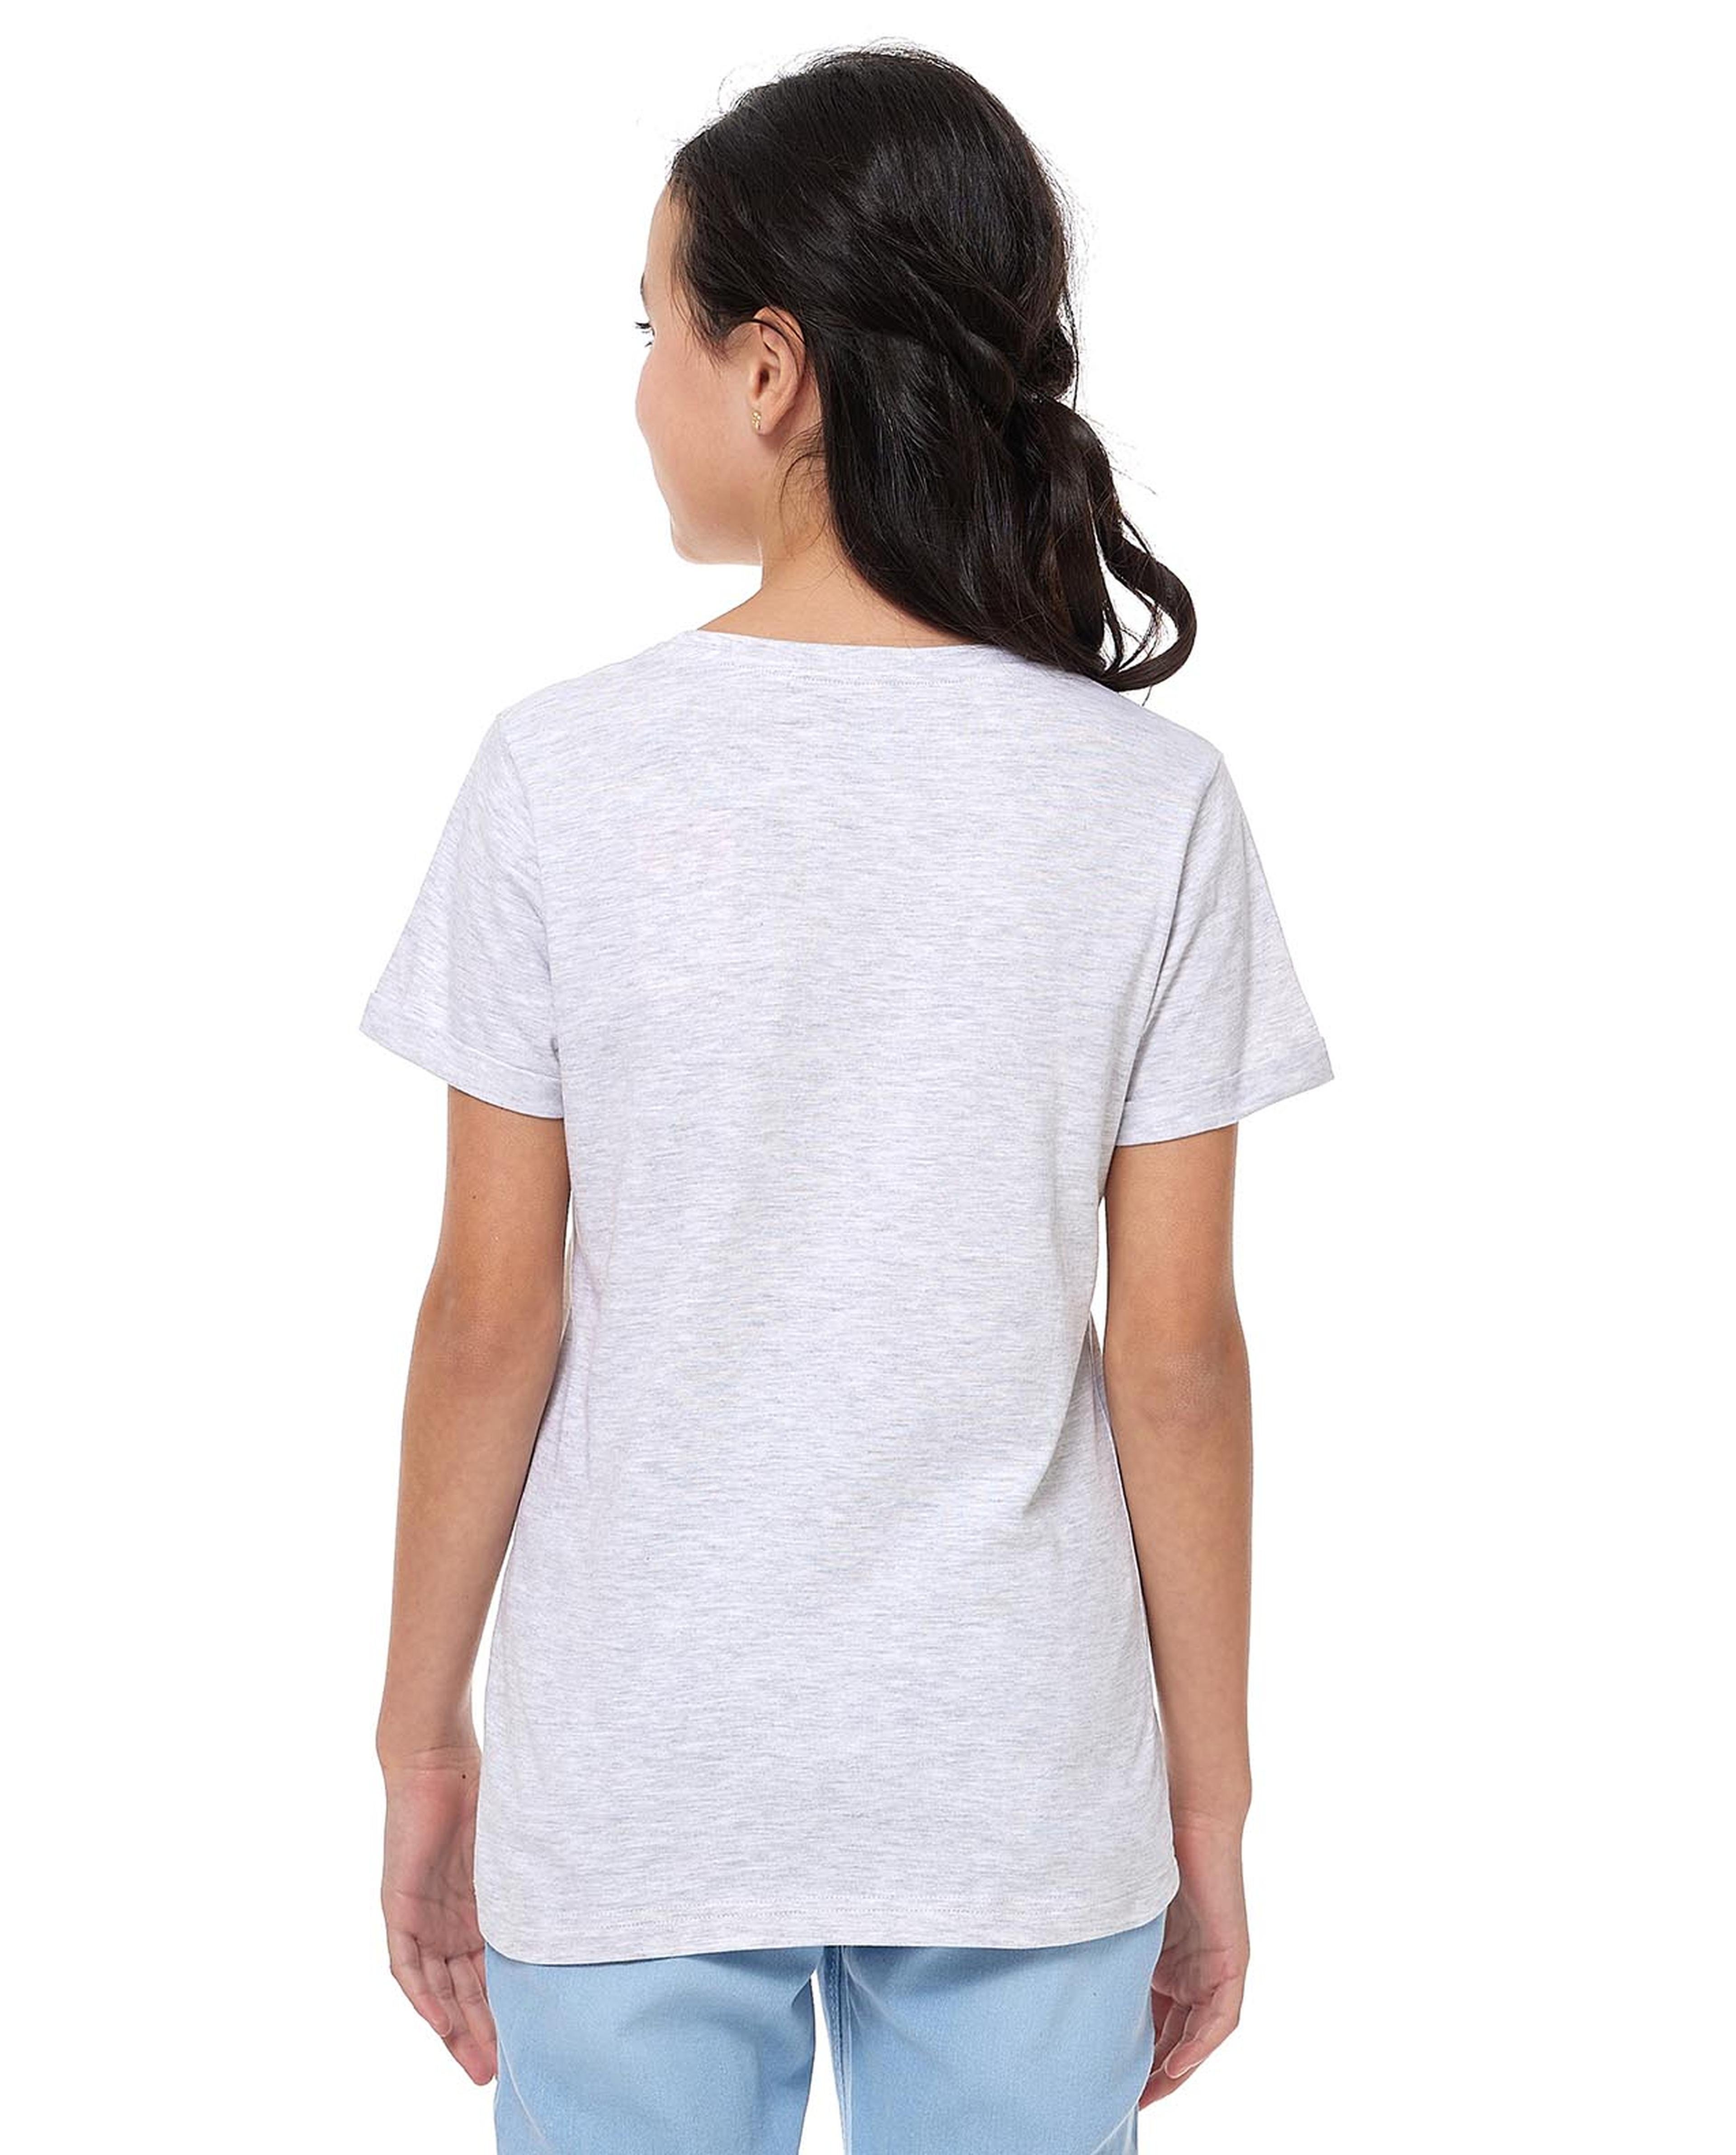 Graphic Print T-Shirt with Crew Neck and Short Sleeves